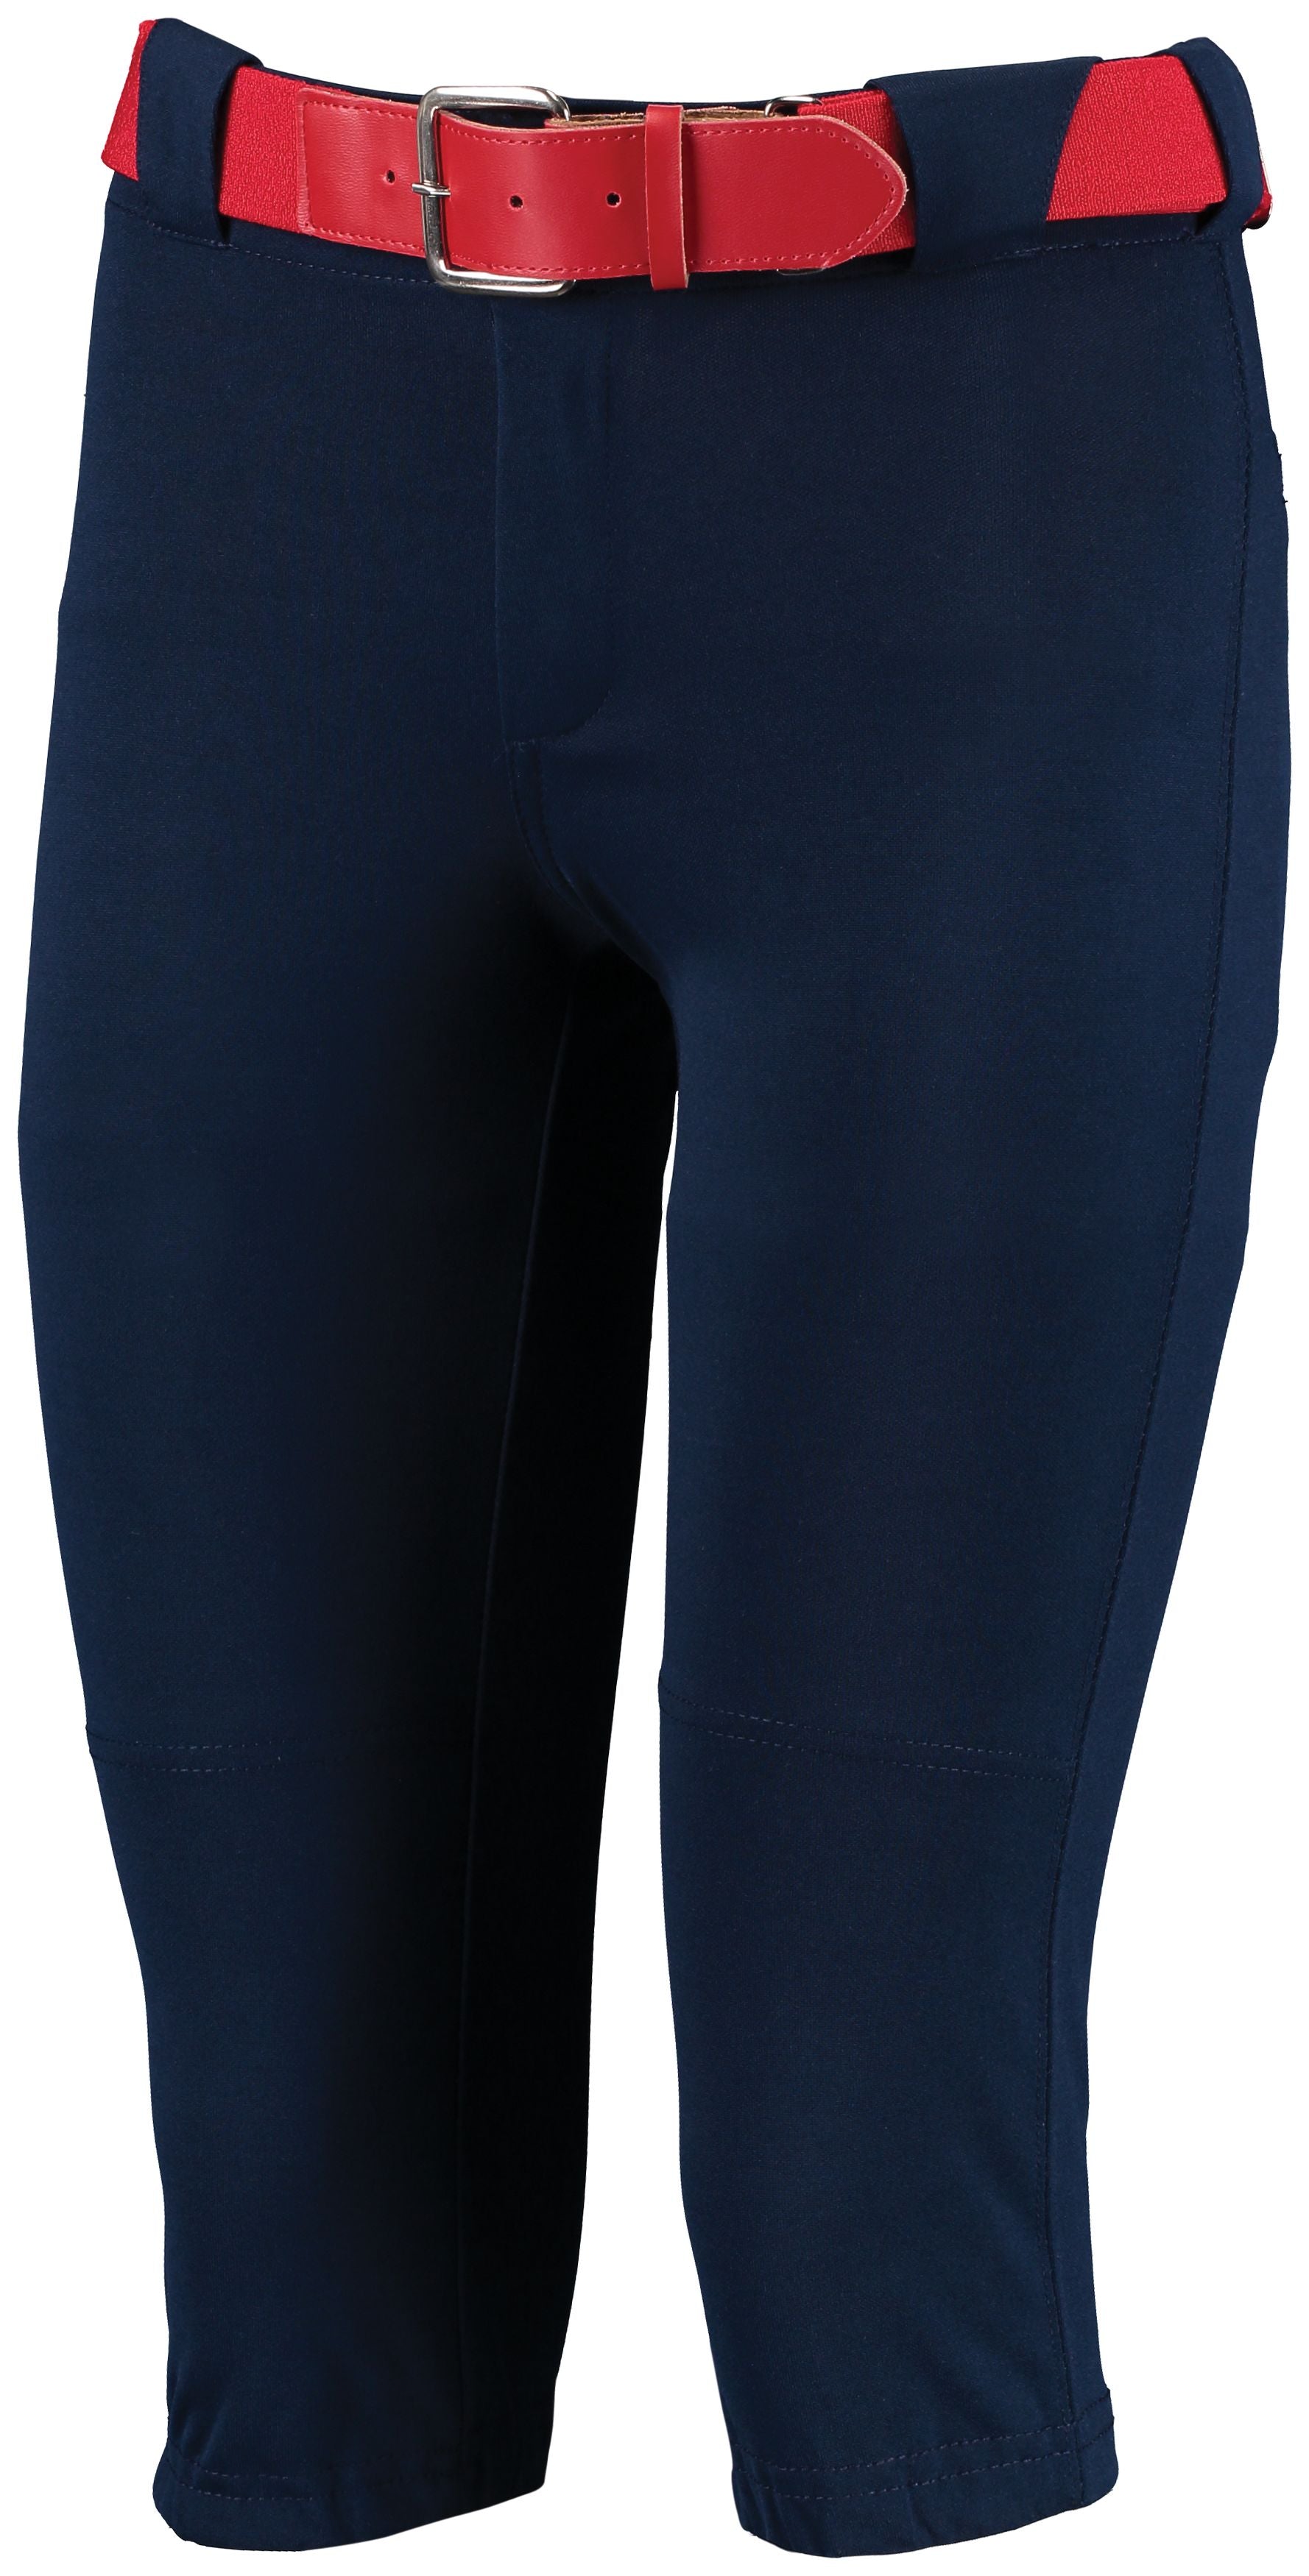 Russell Athletic Girls Low Rise Knicker Length Pant in Navy  -Part of the Girls, Softball, Russell-Athletic-Products product lines at KanaleyCreations.com